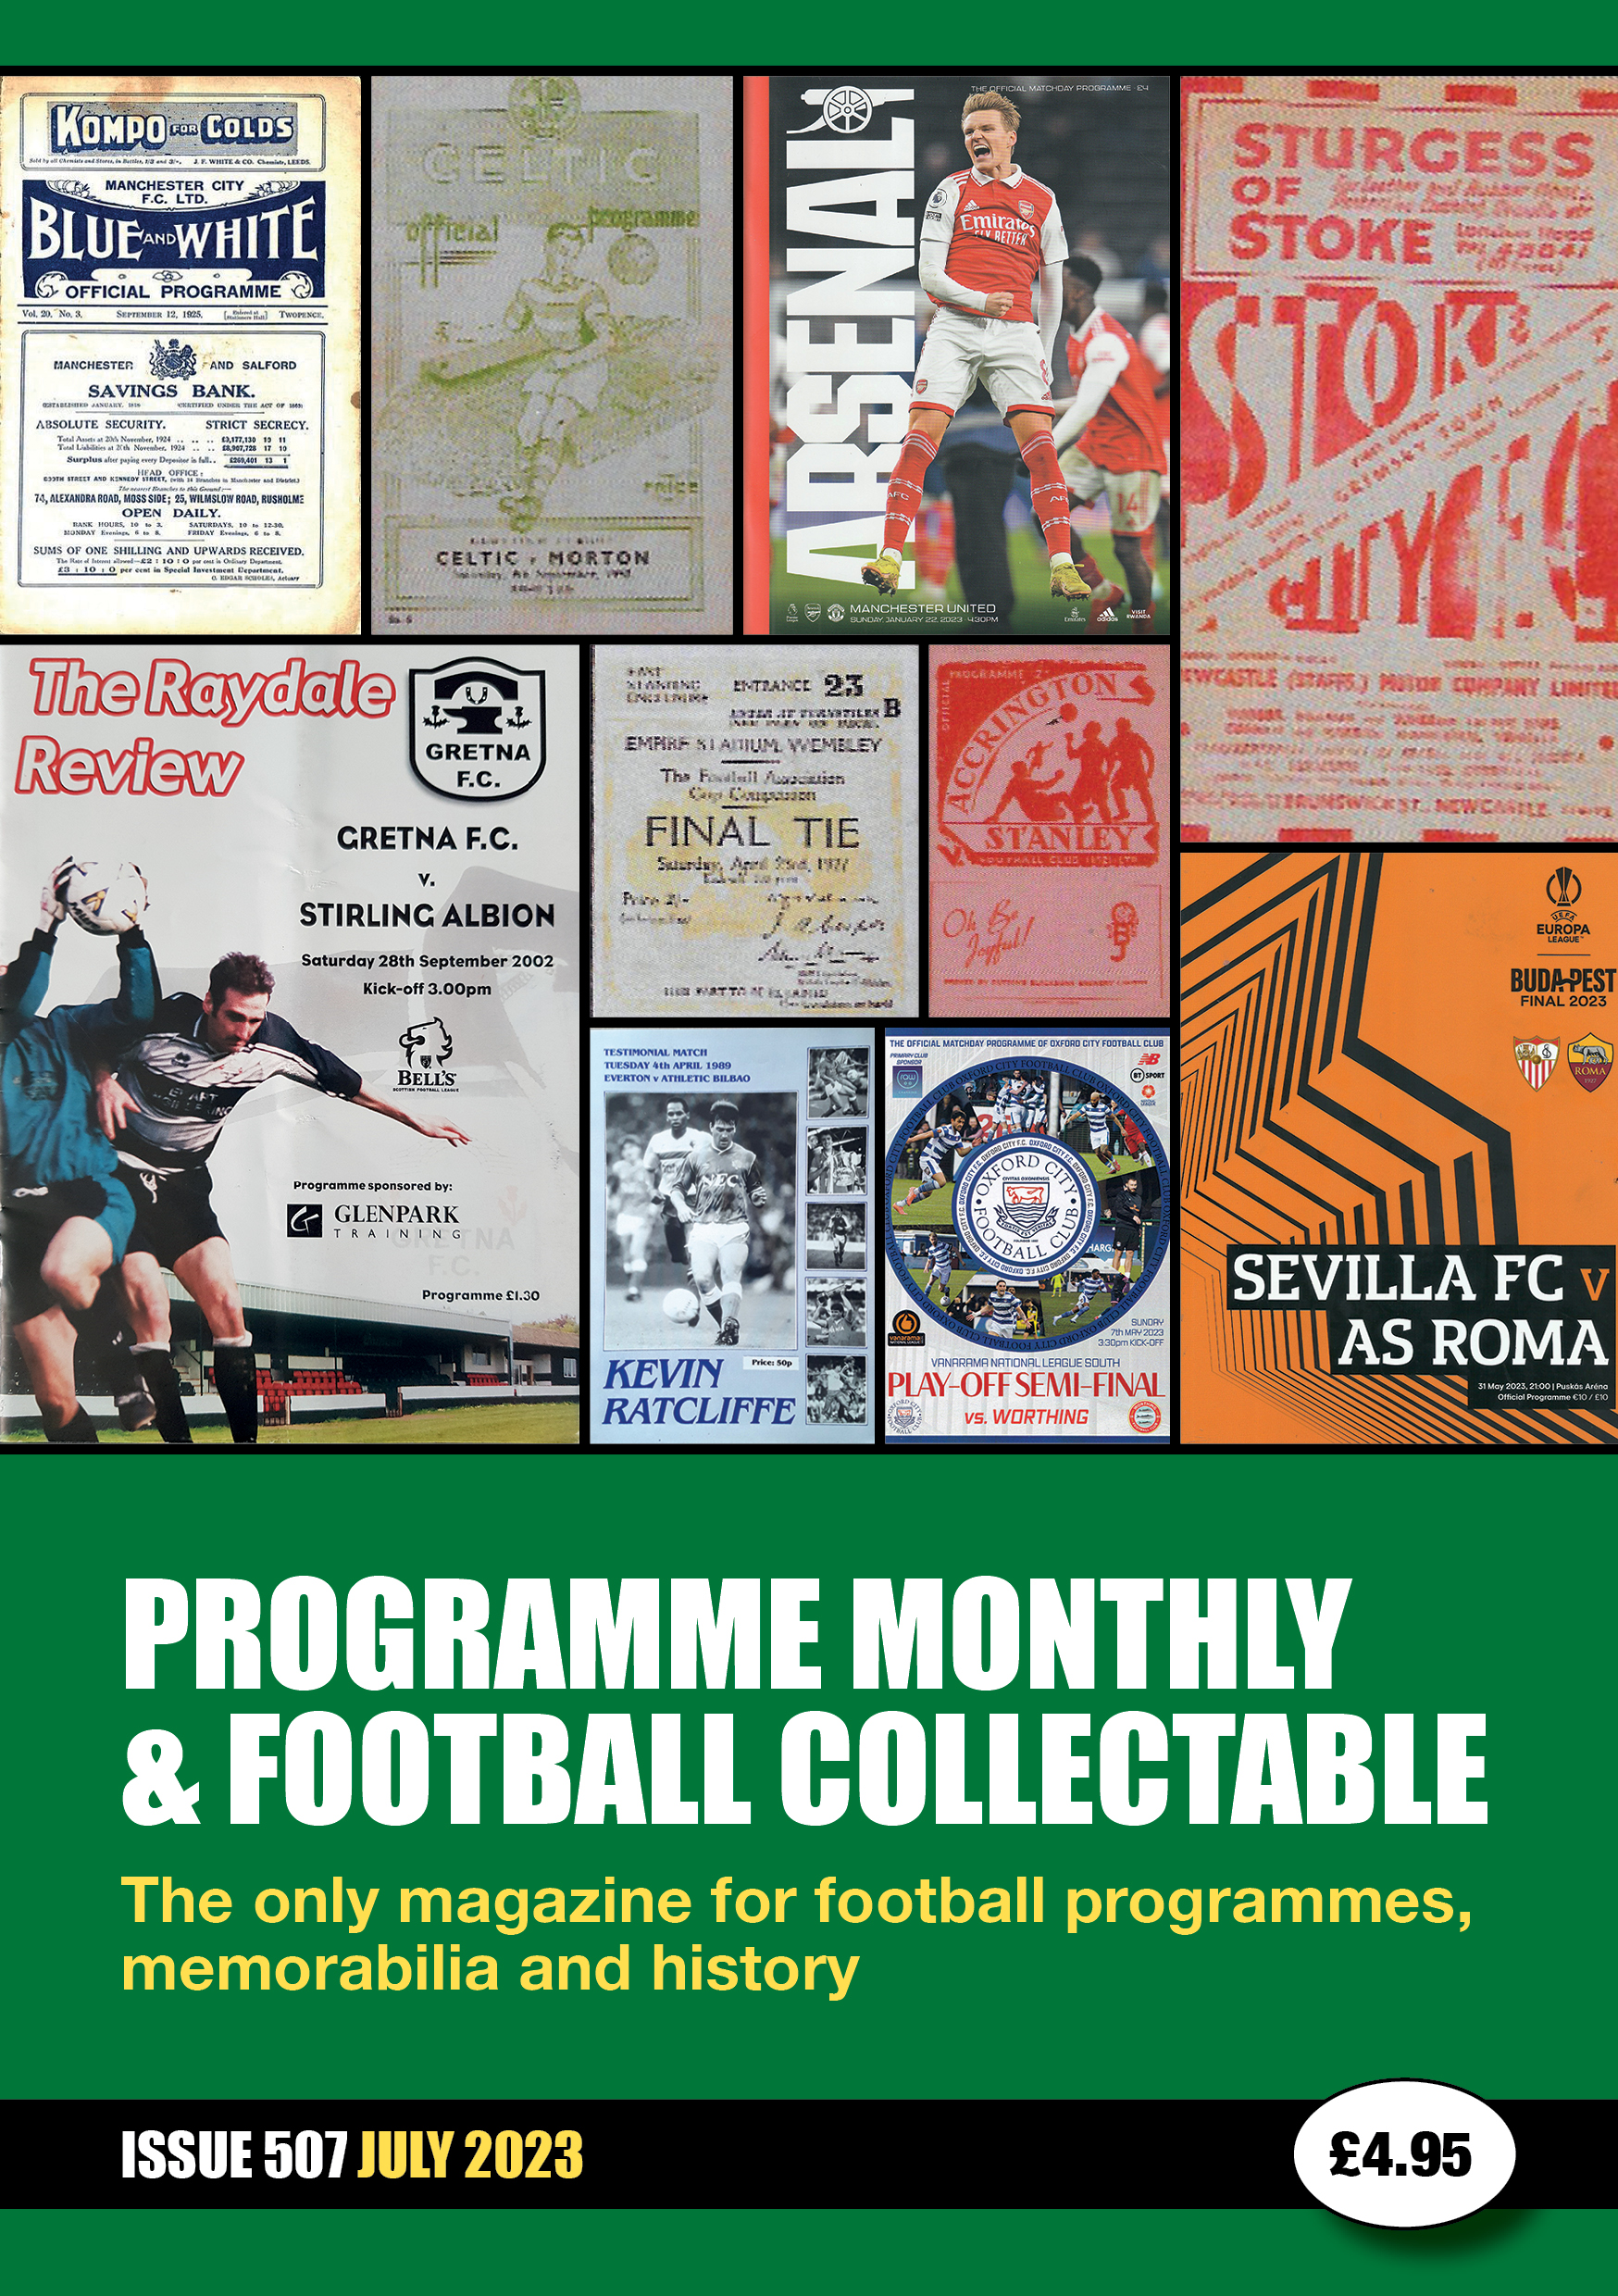 Programme Monthly - Issue 507 July 2023